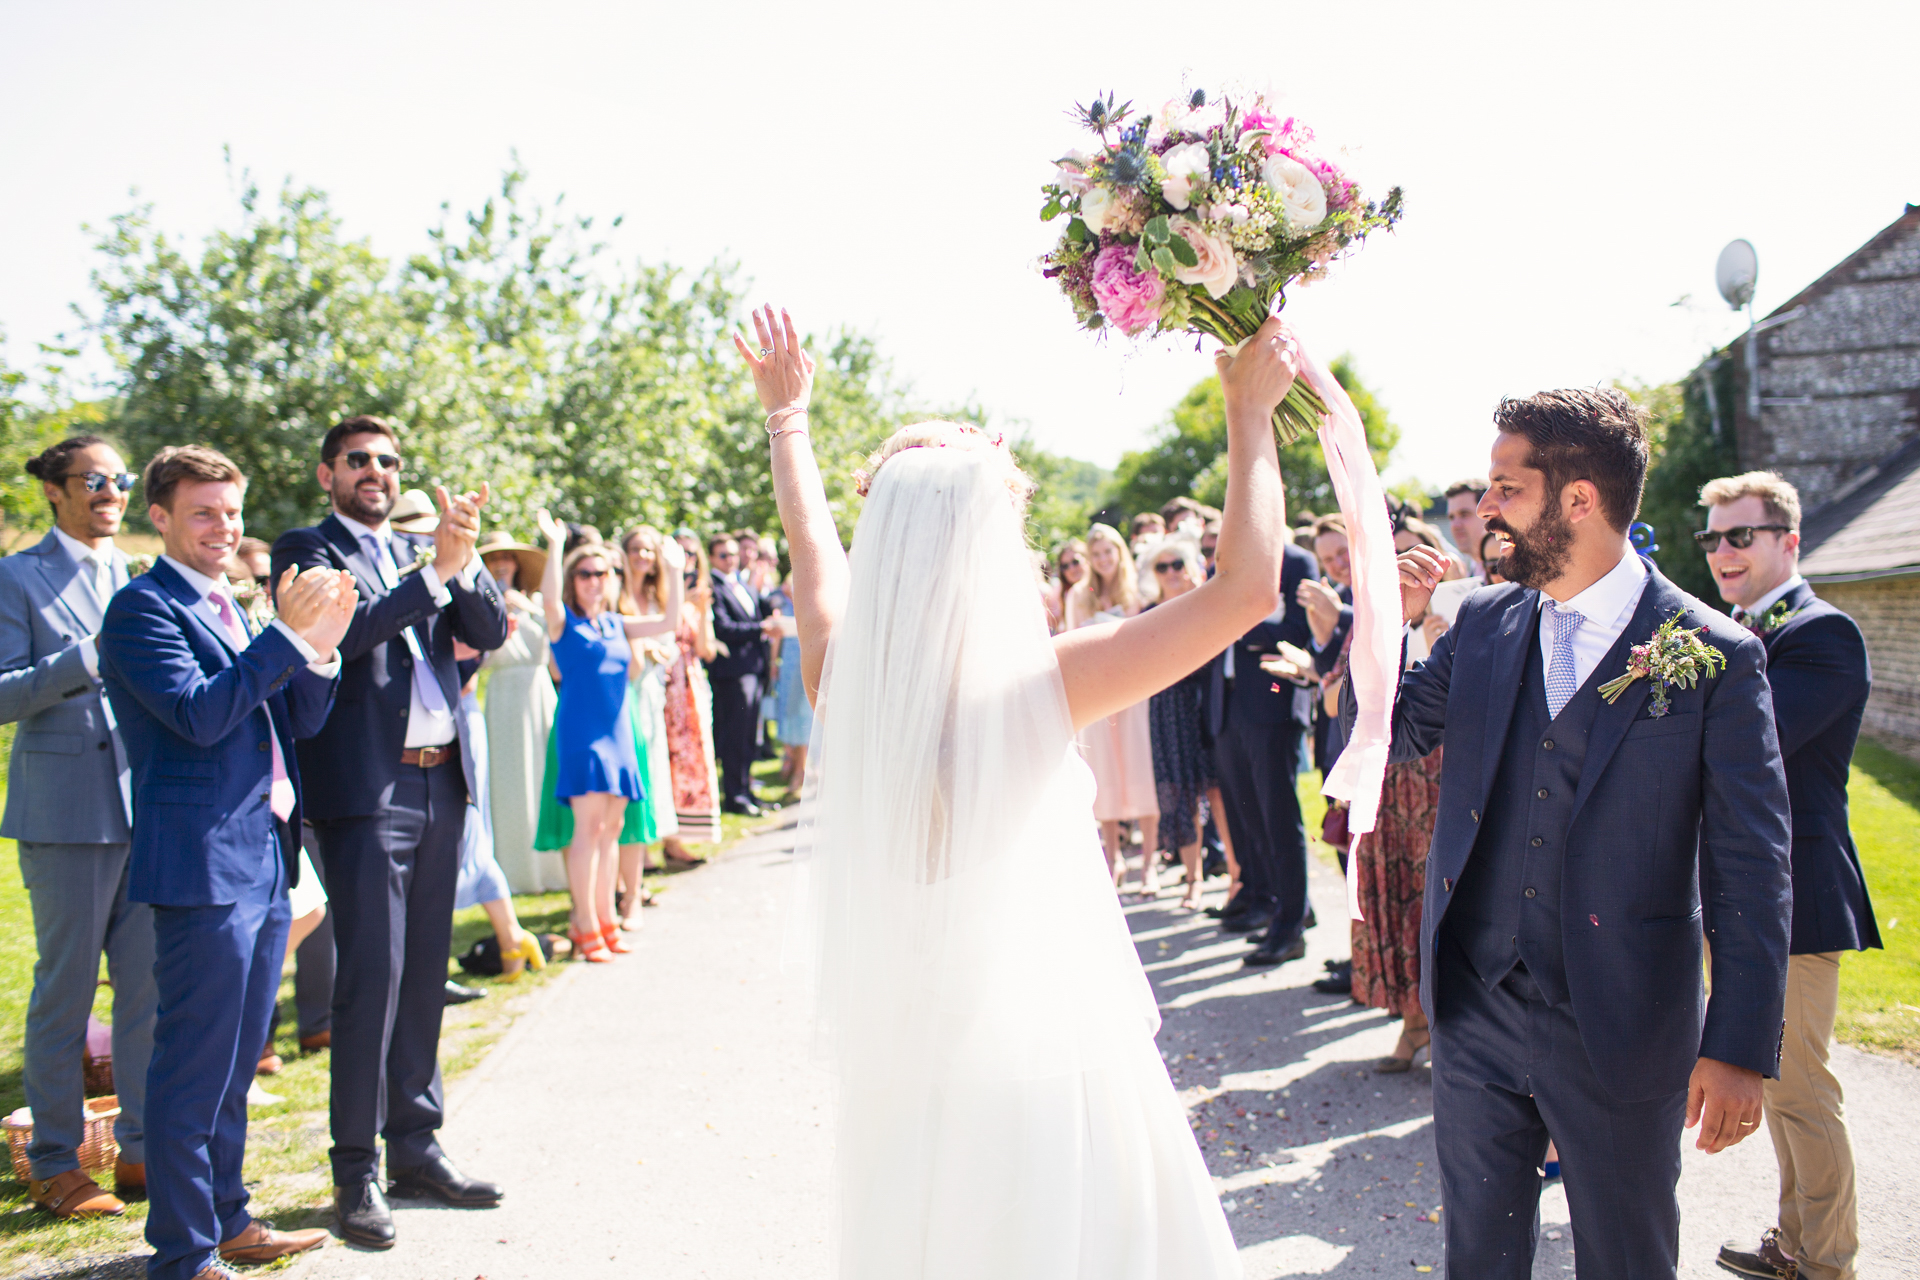 Bride and groom get married at Upwaltham Barns in Chichester